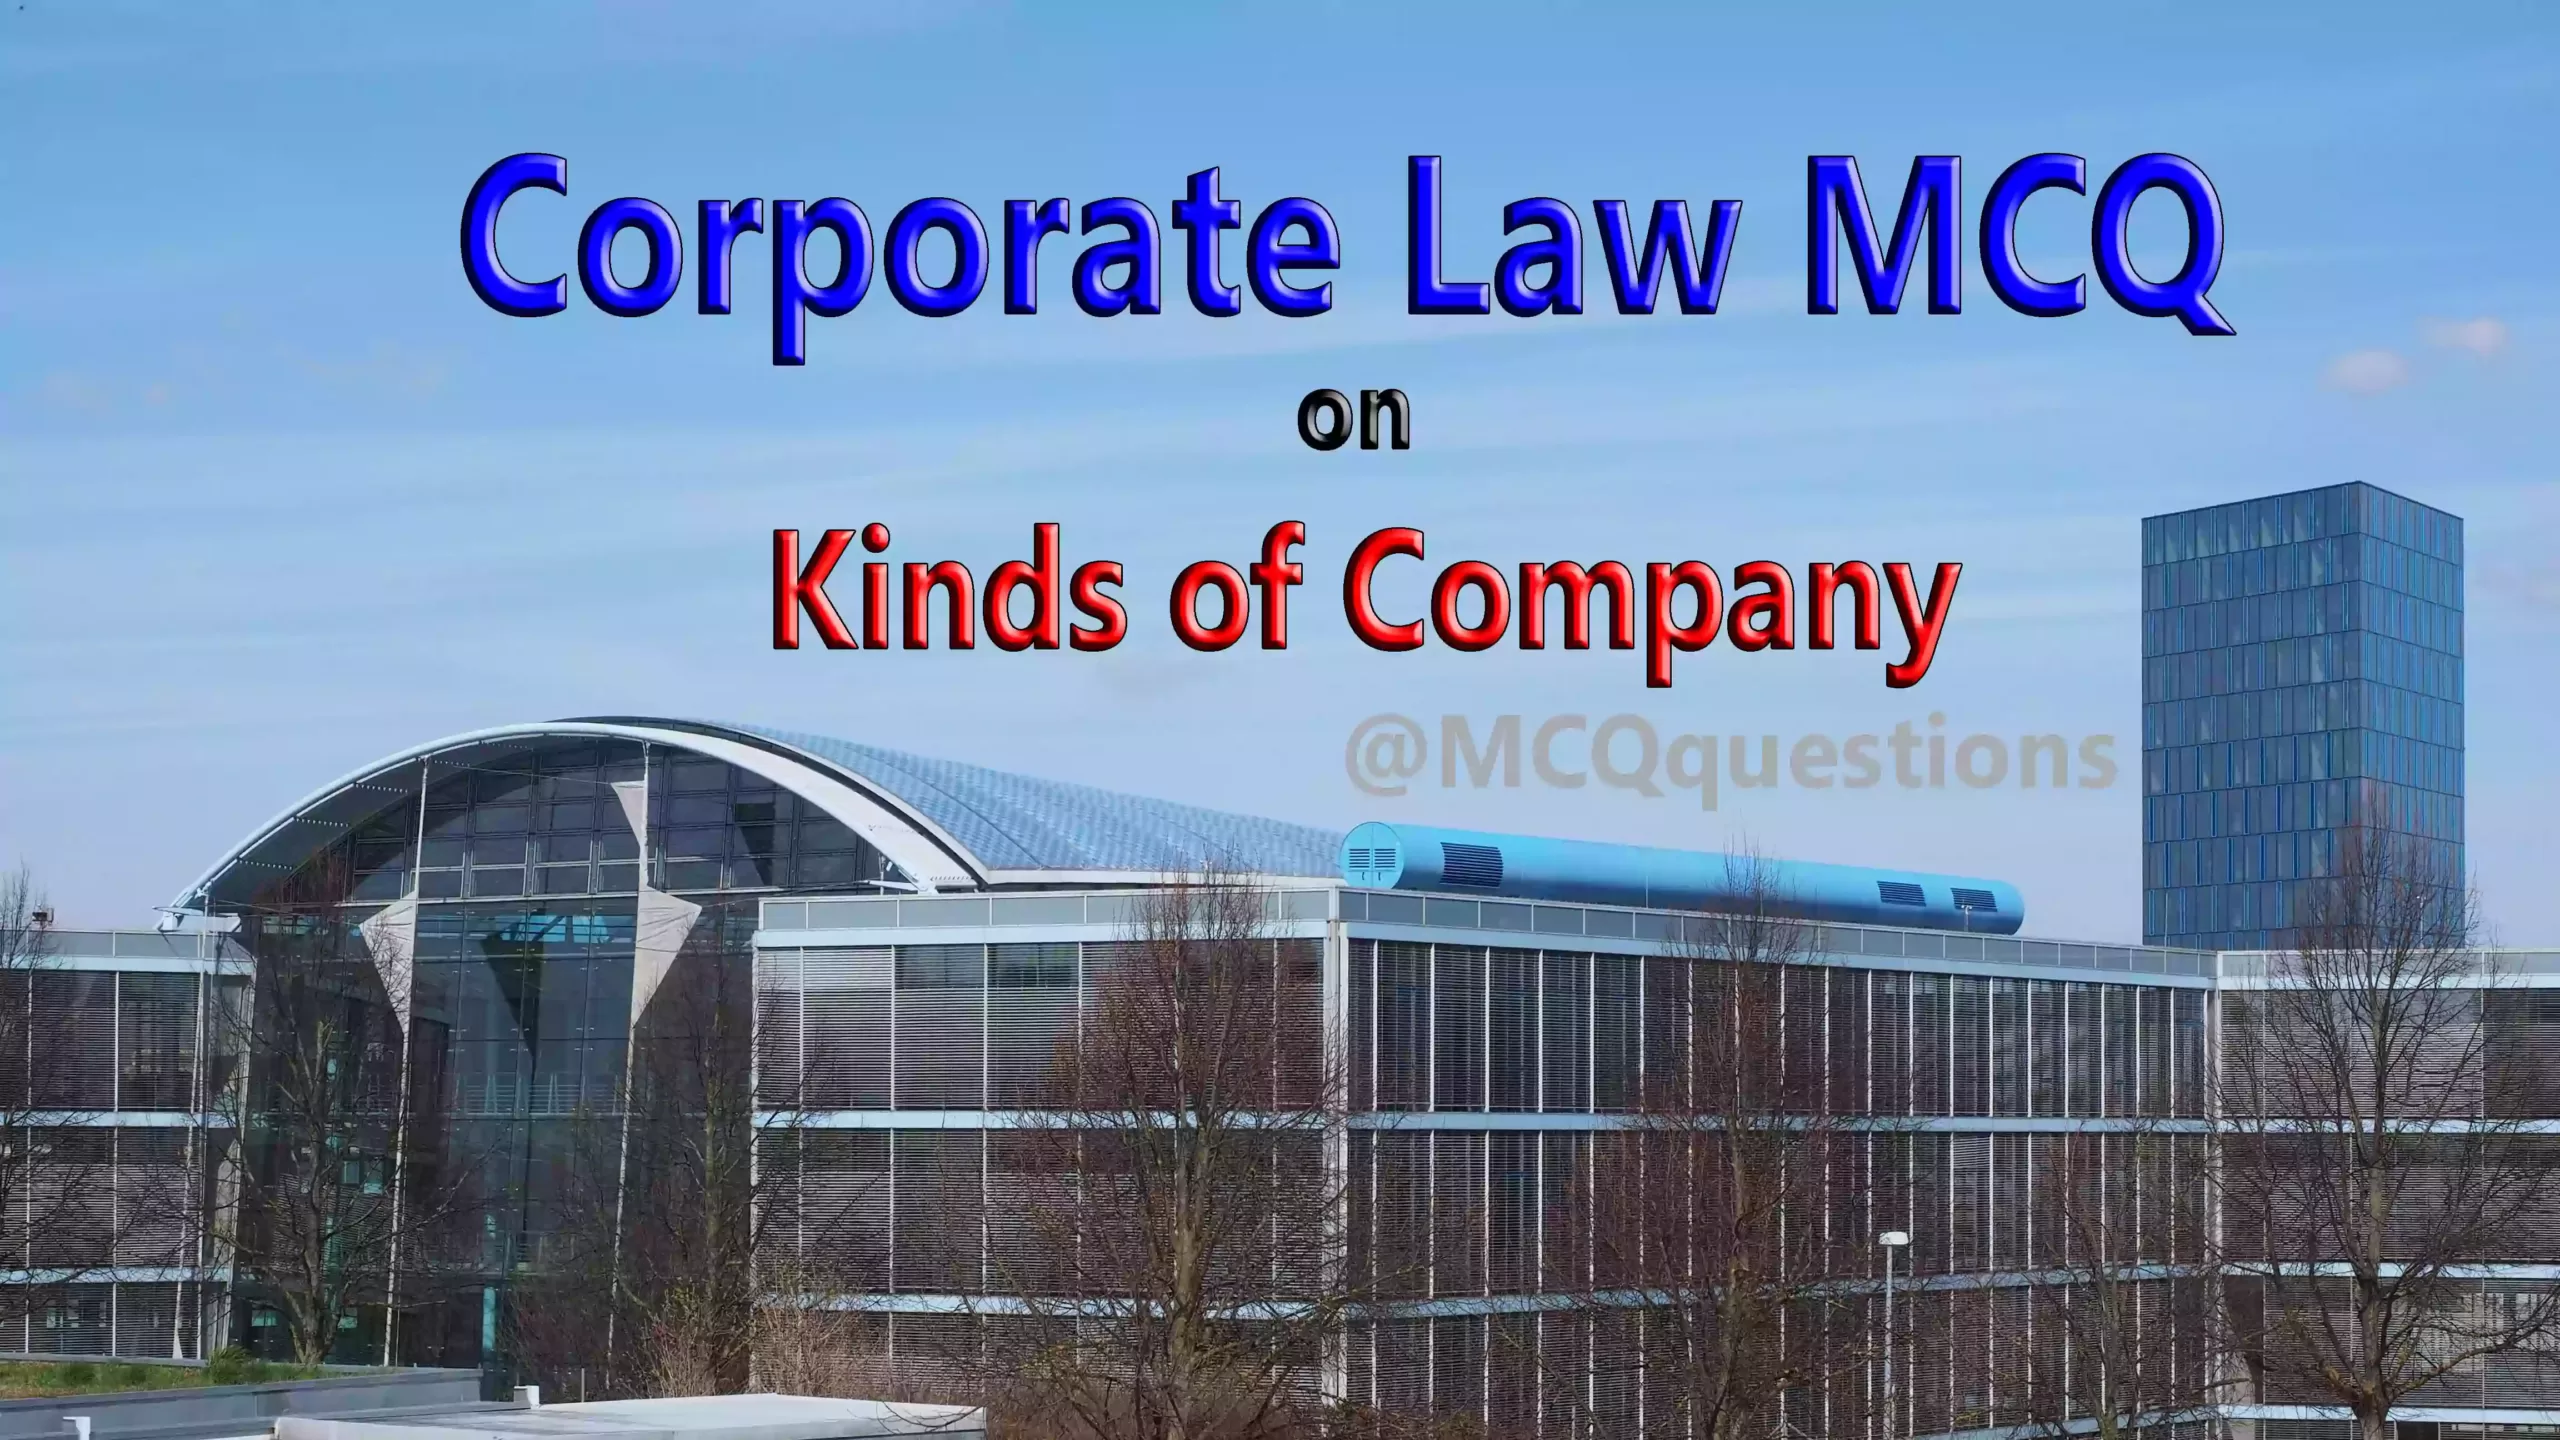 Corporate Law MCQ on Kinds of Company